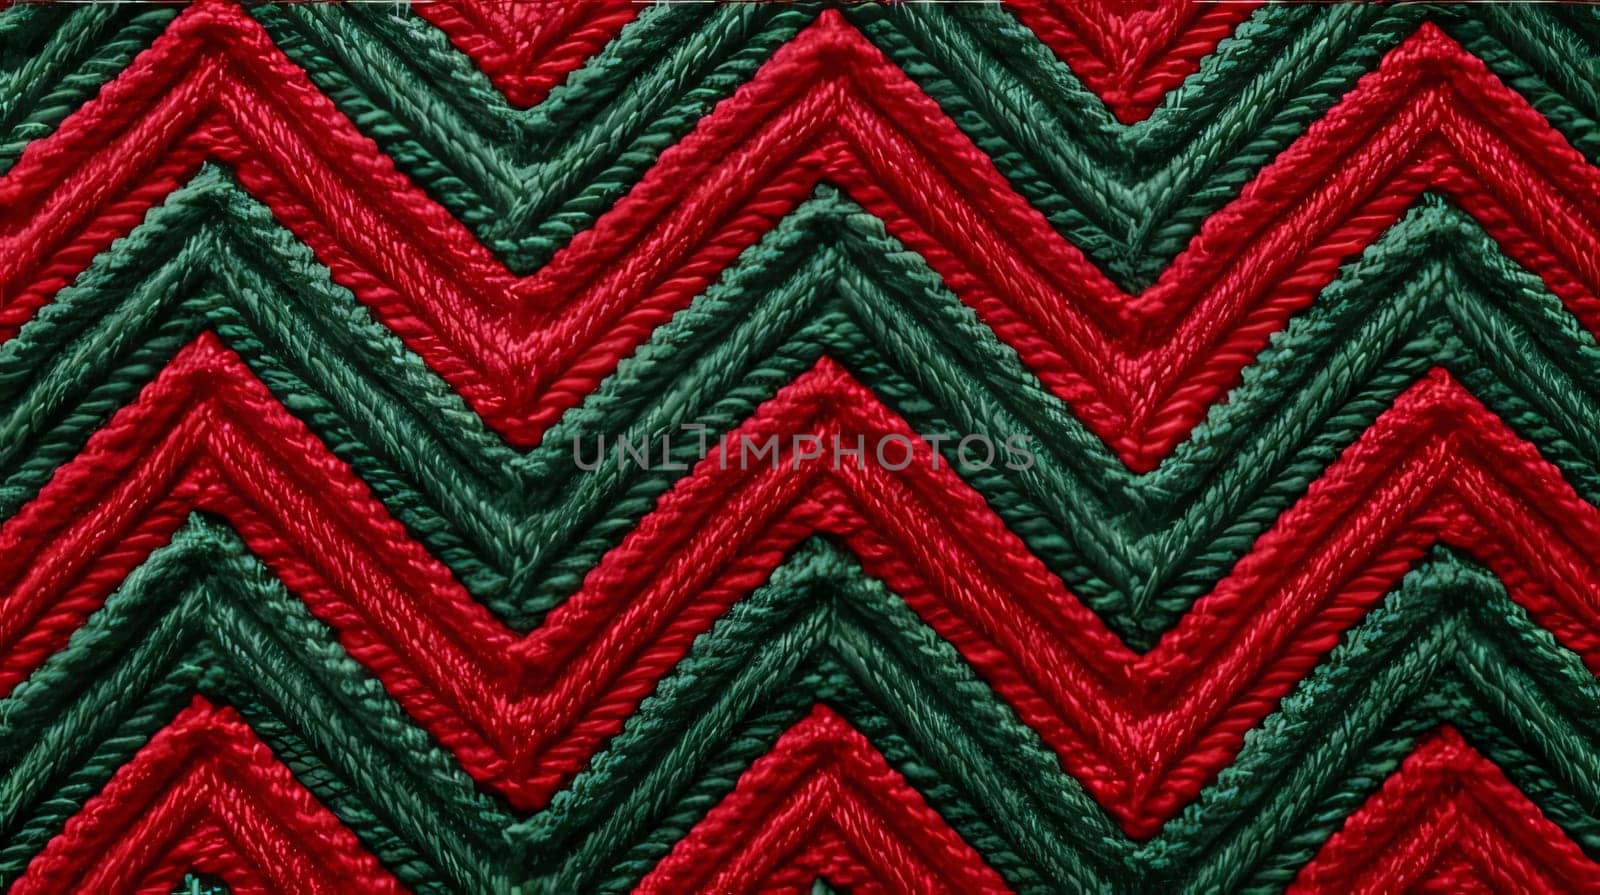 Abstract background design: Red and green knitted fabric as a background. Seamless pattern